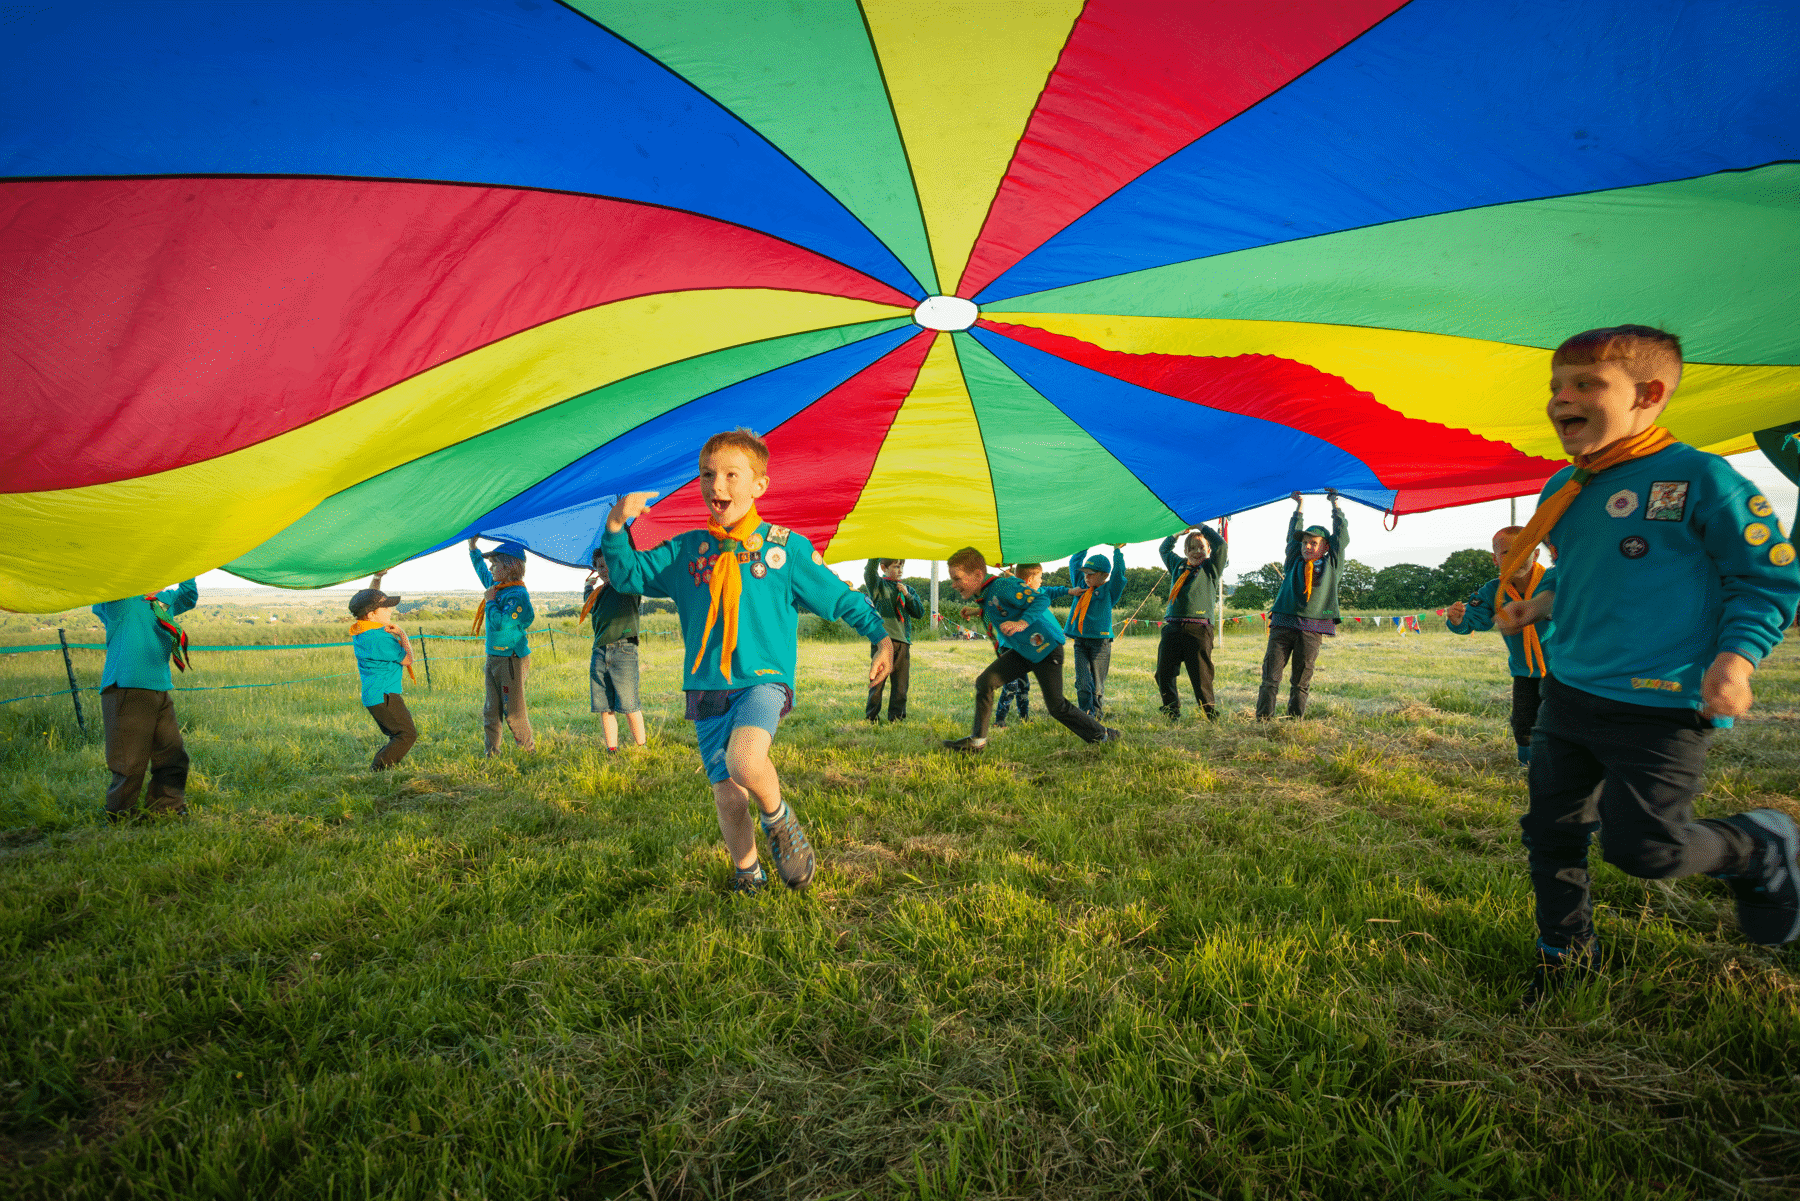 Cubs and Beavers running under a parachute on a field